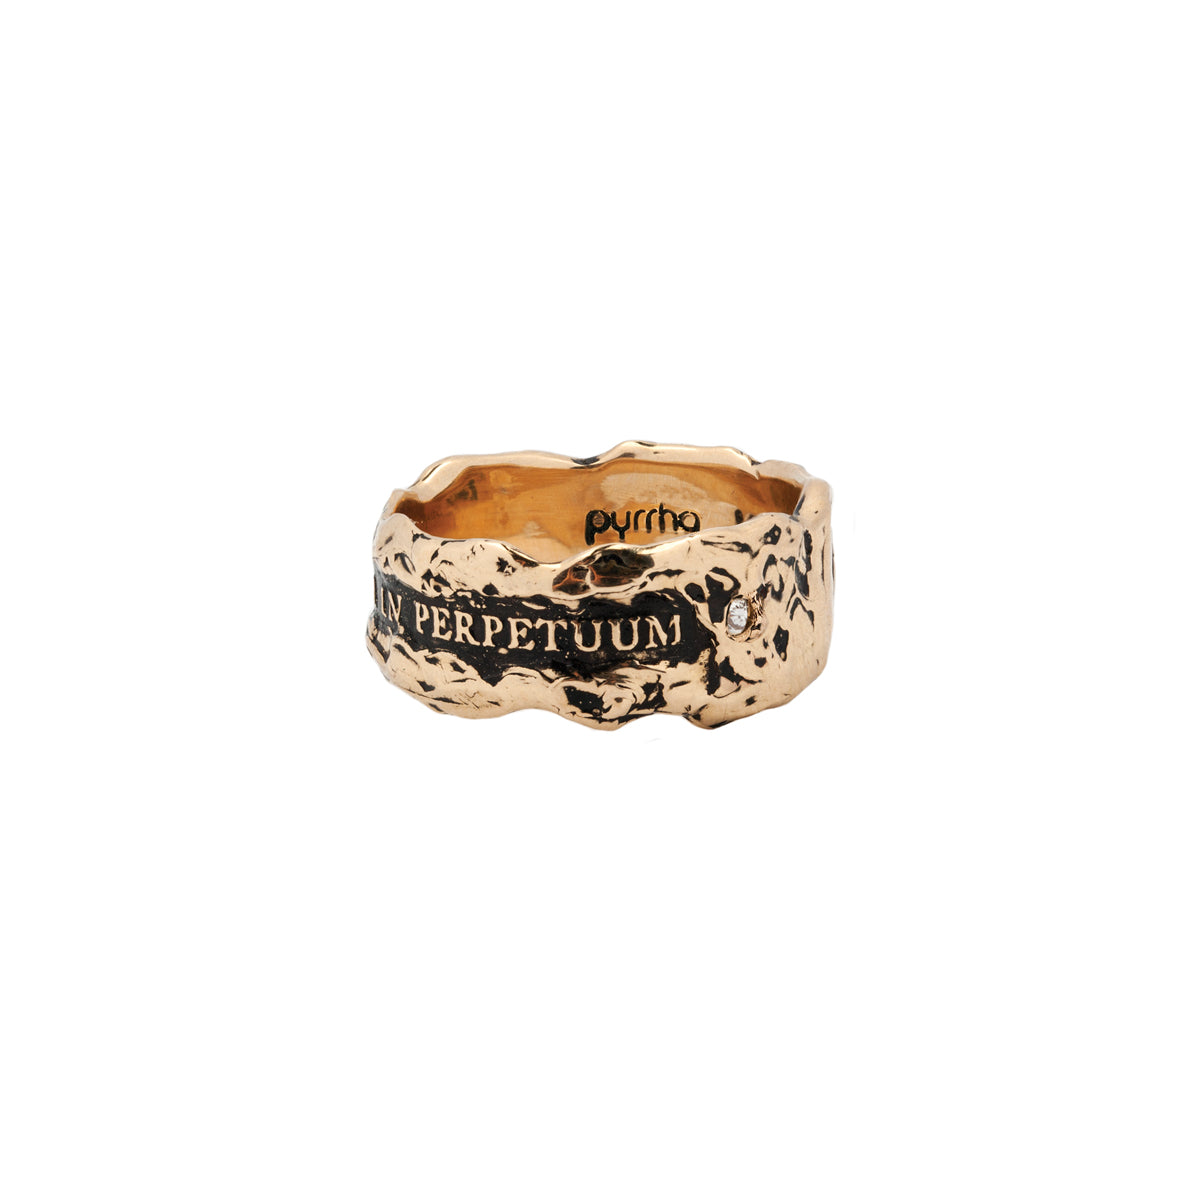 Together Forever Wide 14K Gold Stone Set Textured Band Ring